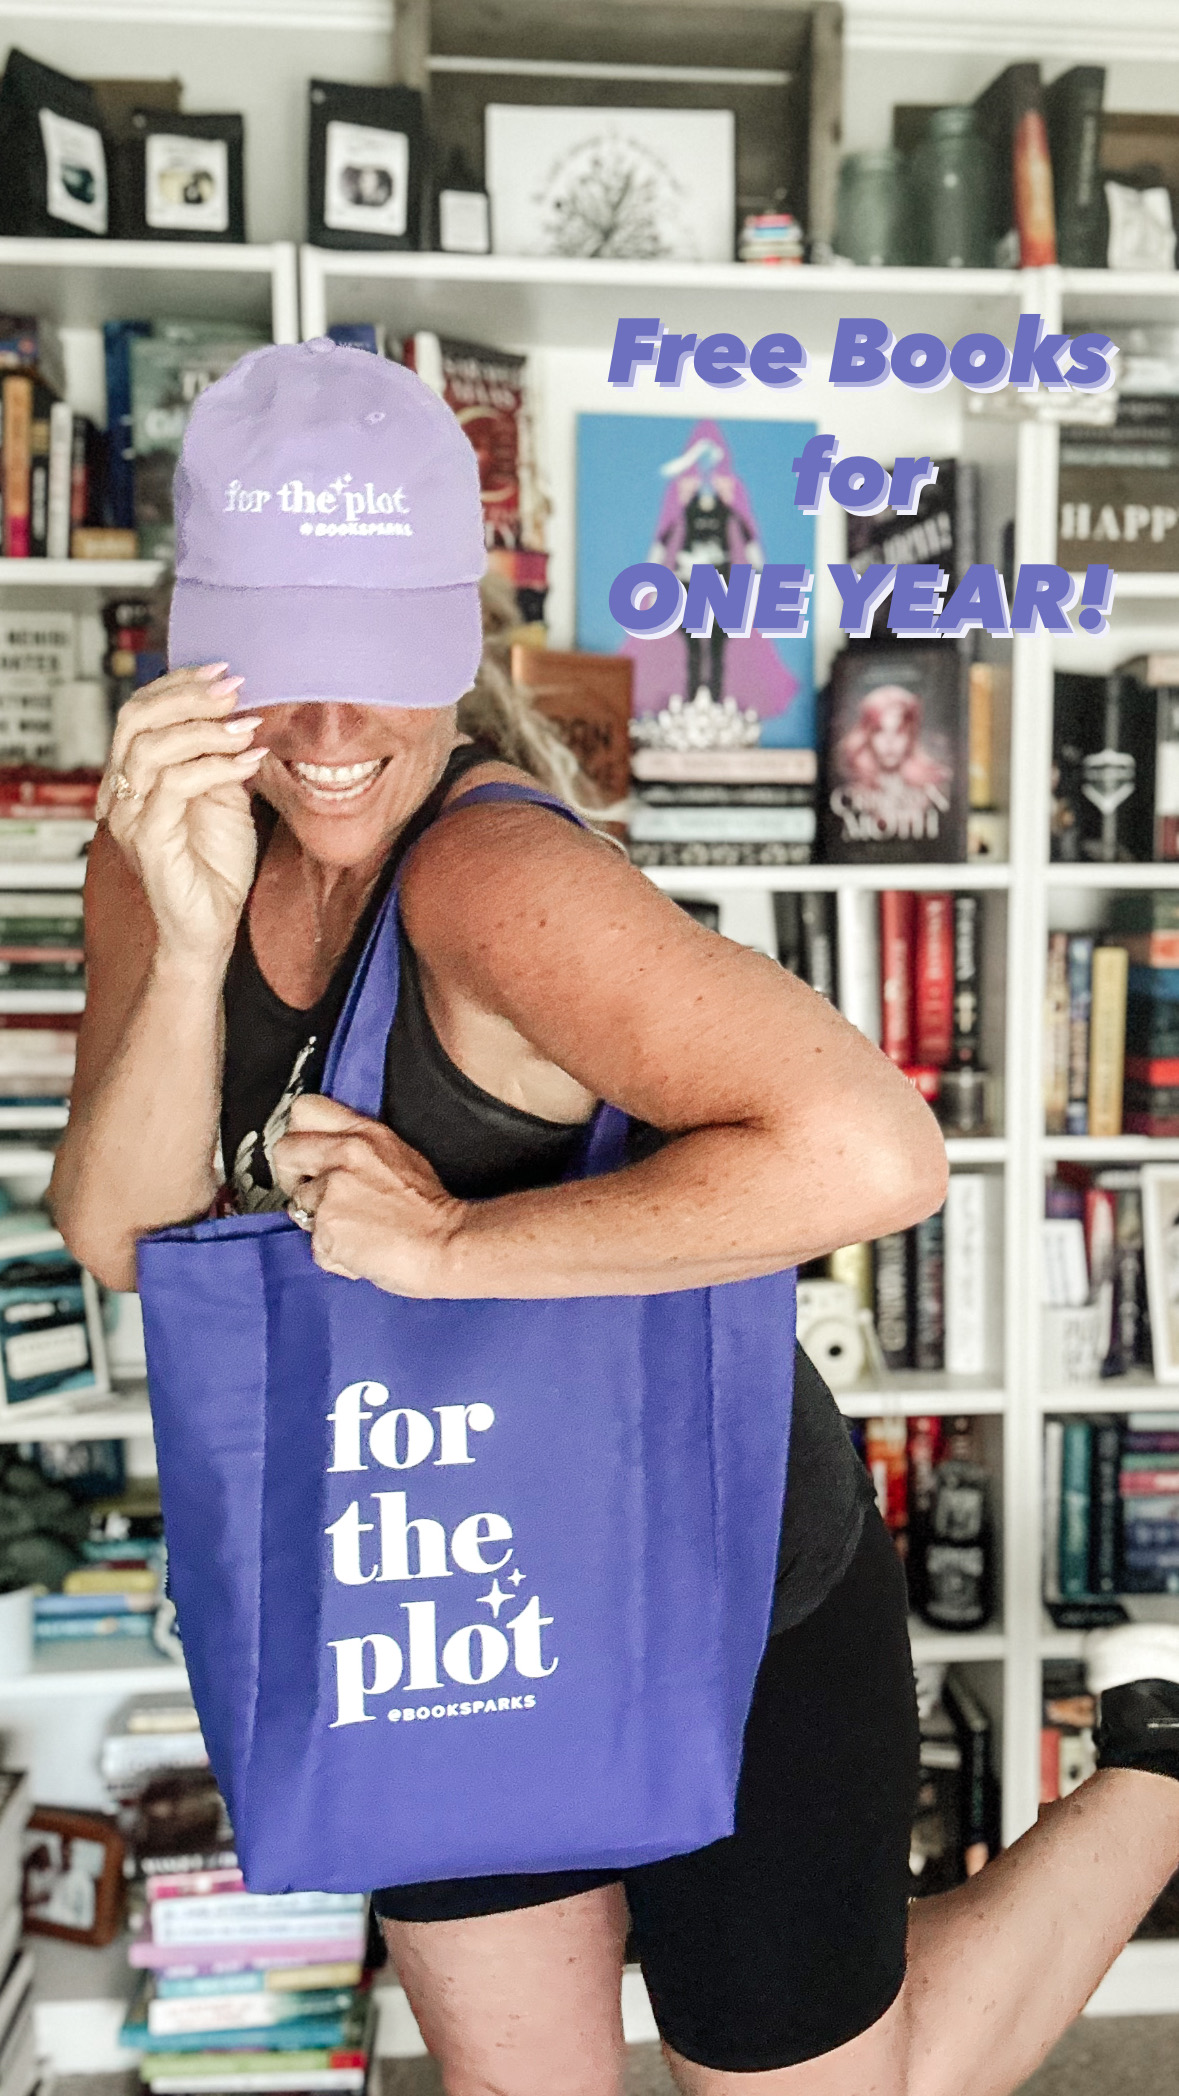 Momma Leighellens Book Nook holds a Booksparks Tote and wears a Booksparks hat to share a giveaway celebrating 15 years and One Year of Free Books!